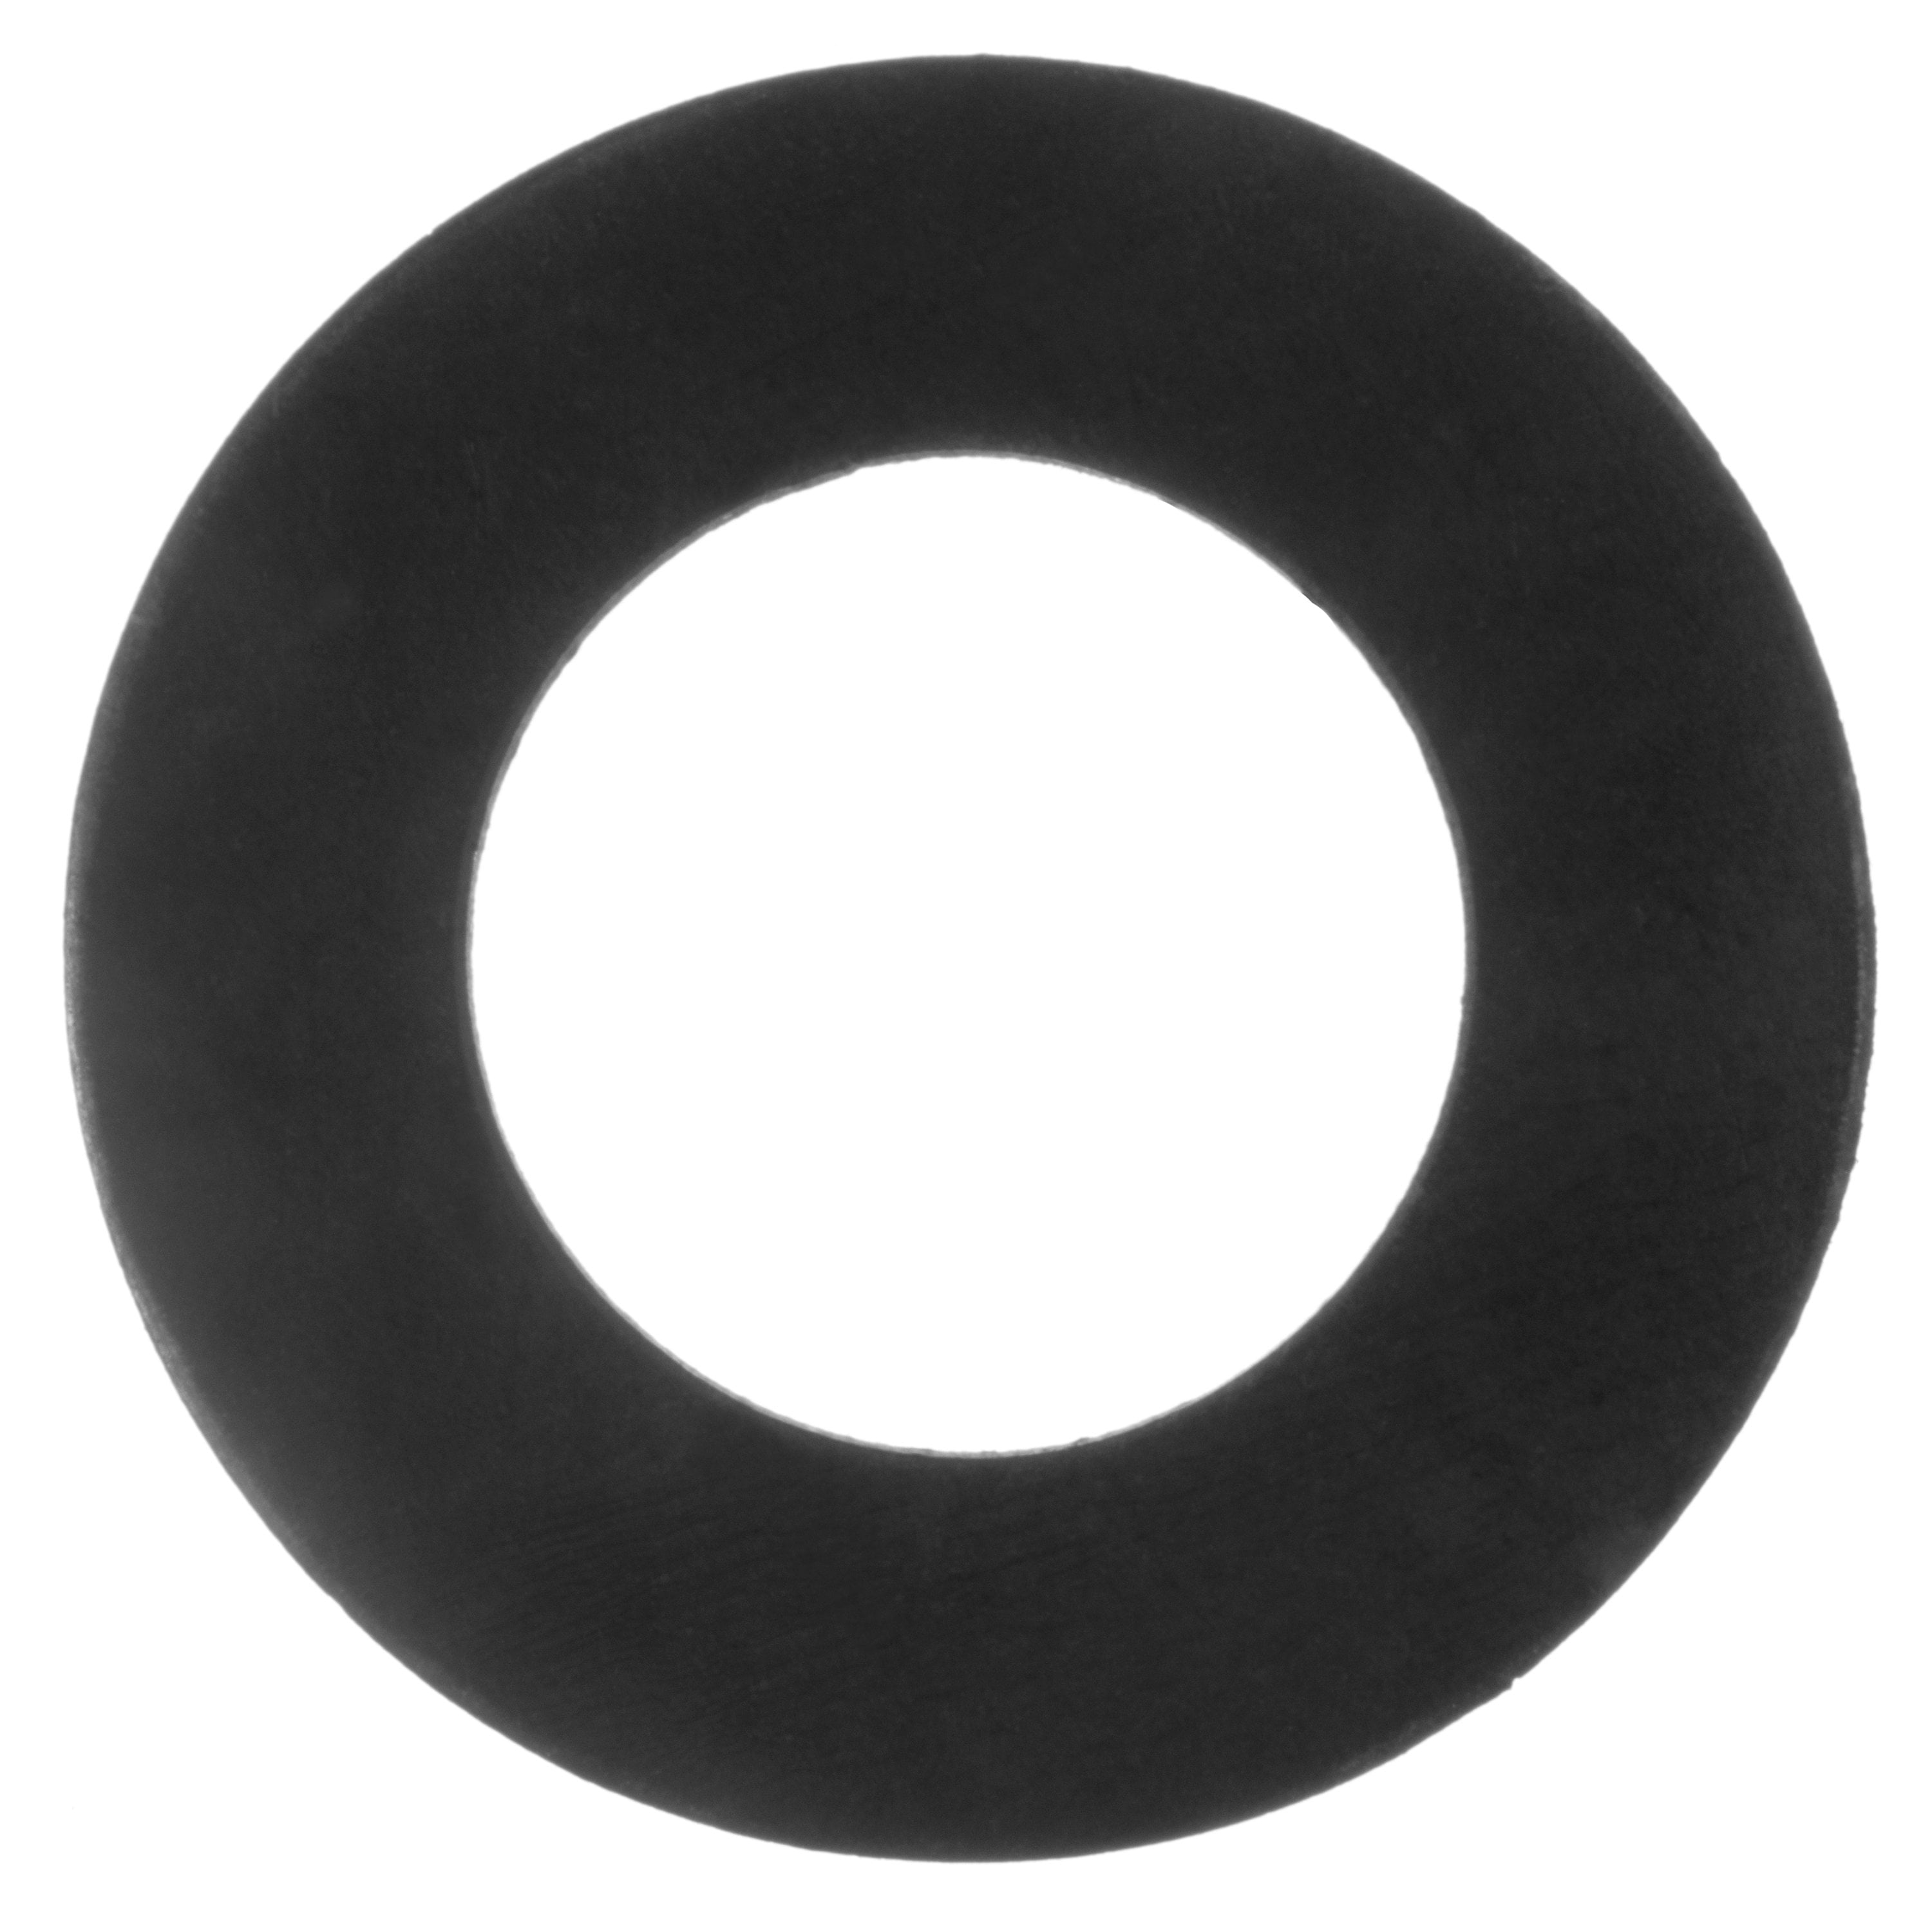 1/8 Thick Class 150 USA Sealing Full Face Viton Rubber Flange Gasket for 6 Pipe 